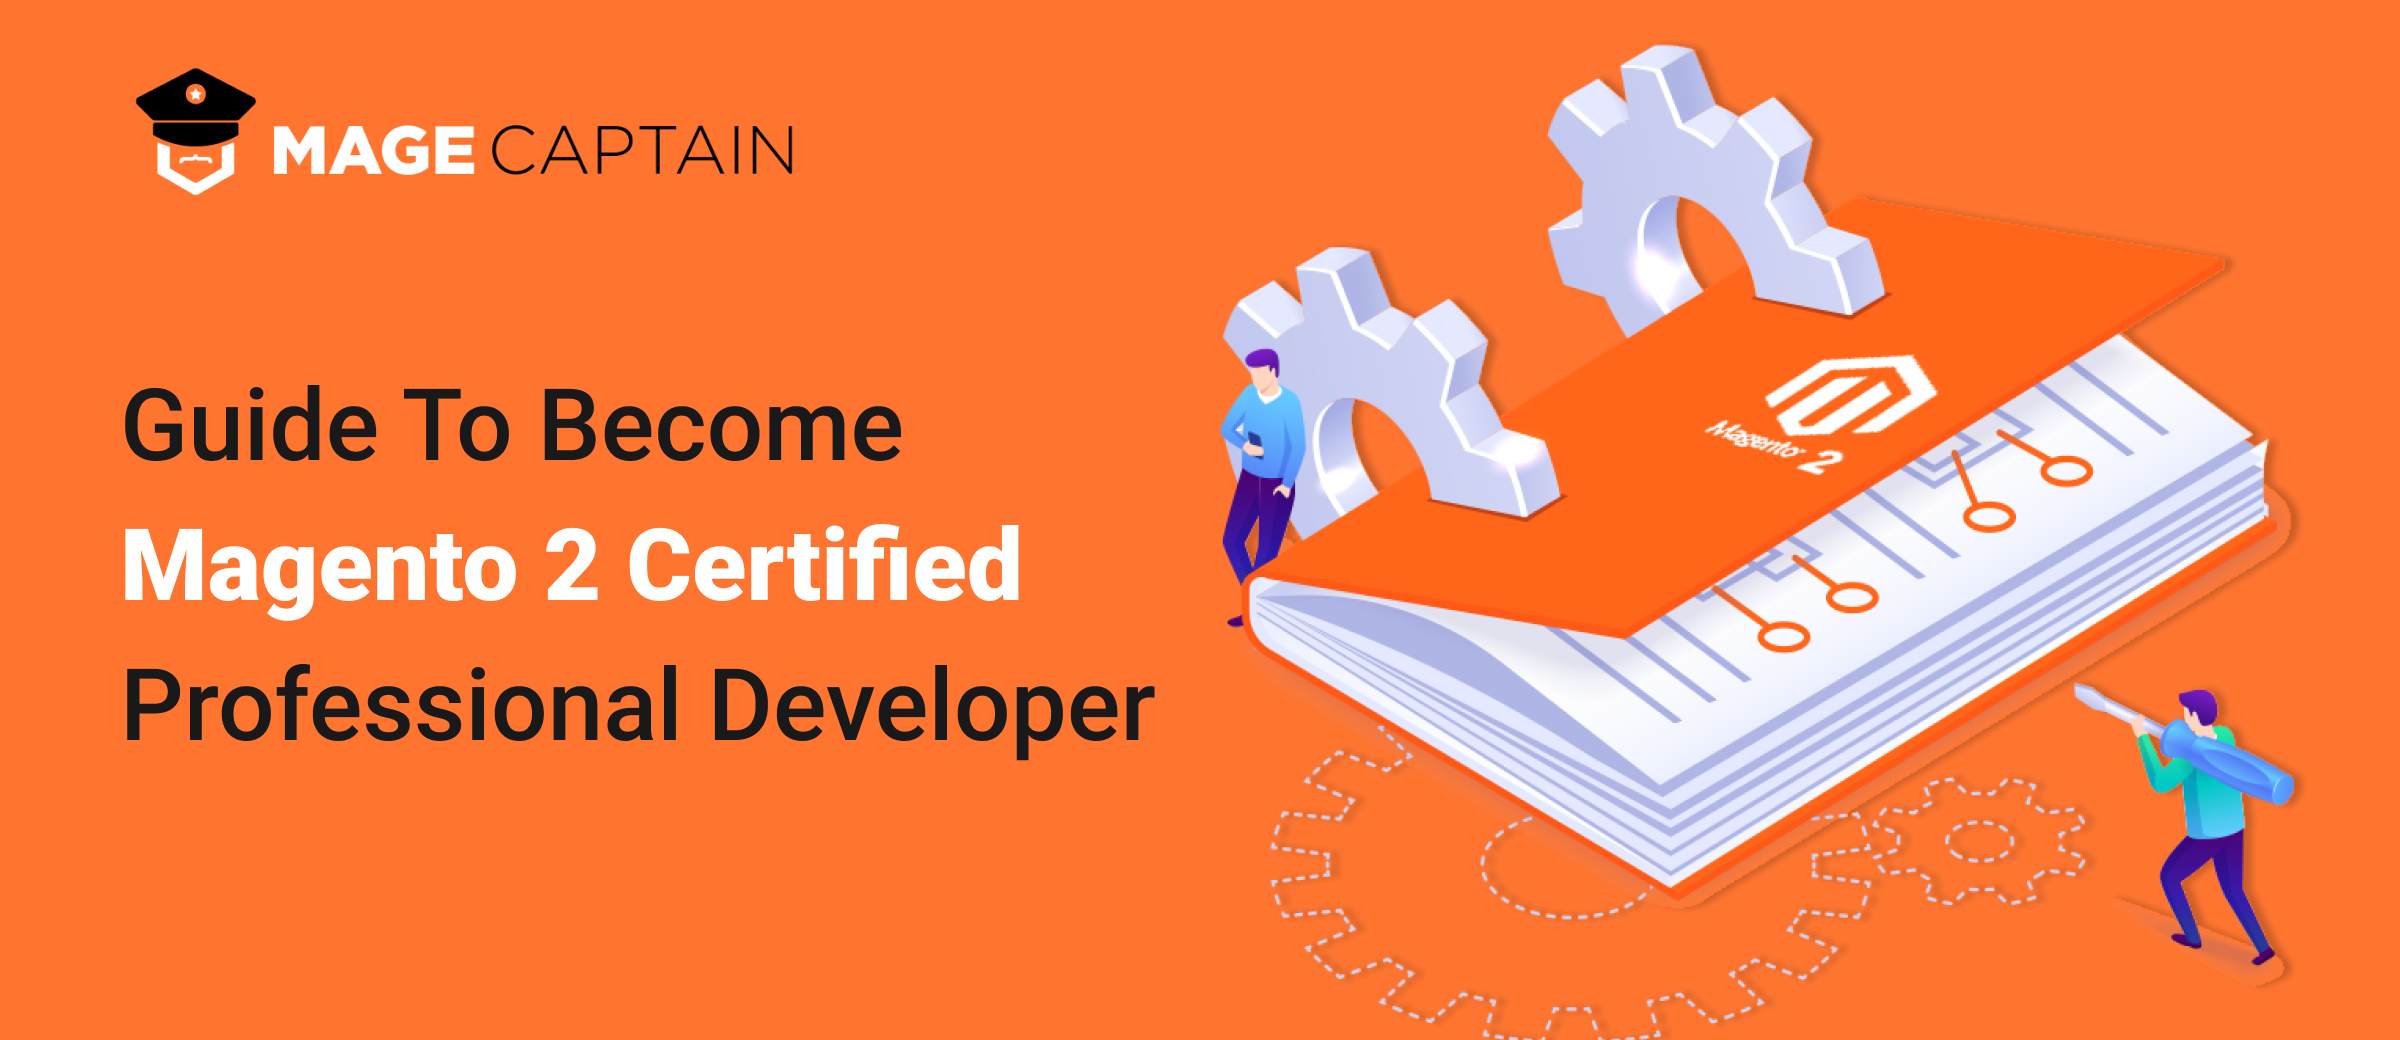 Guide To Become Magento 2 Certified Professional Developer 